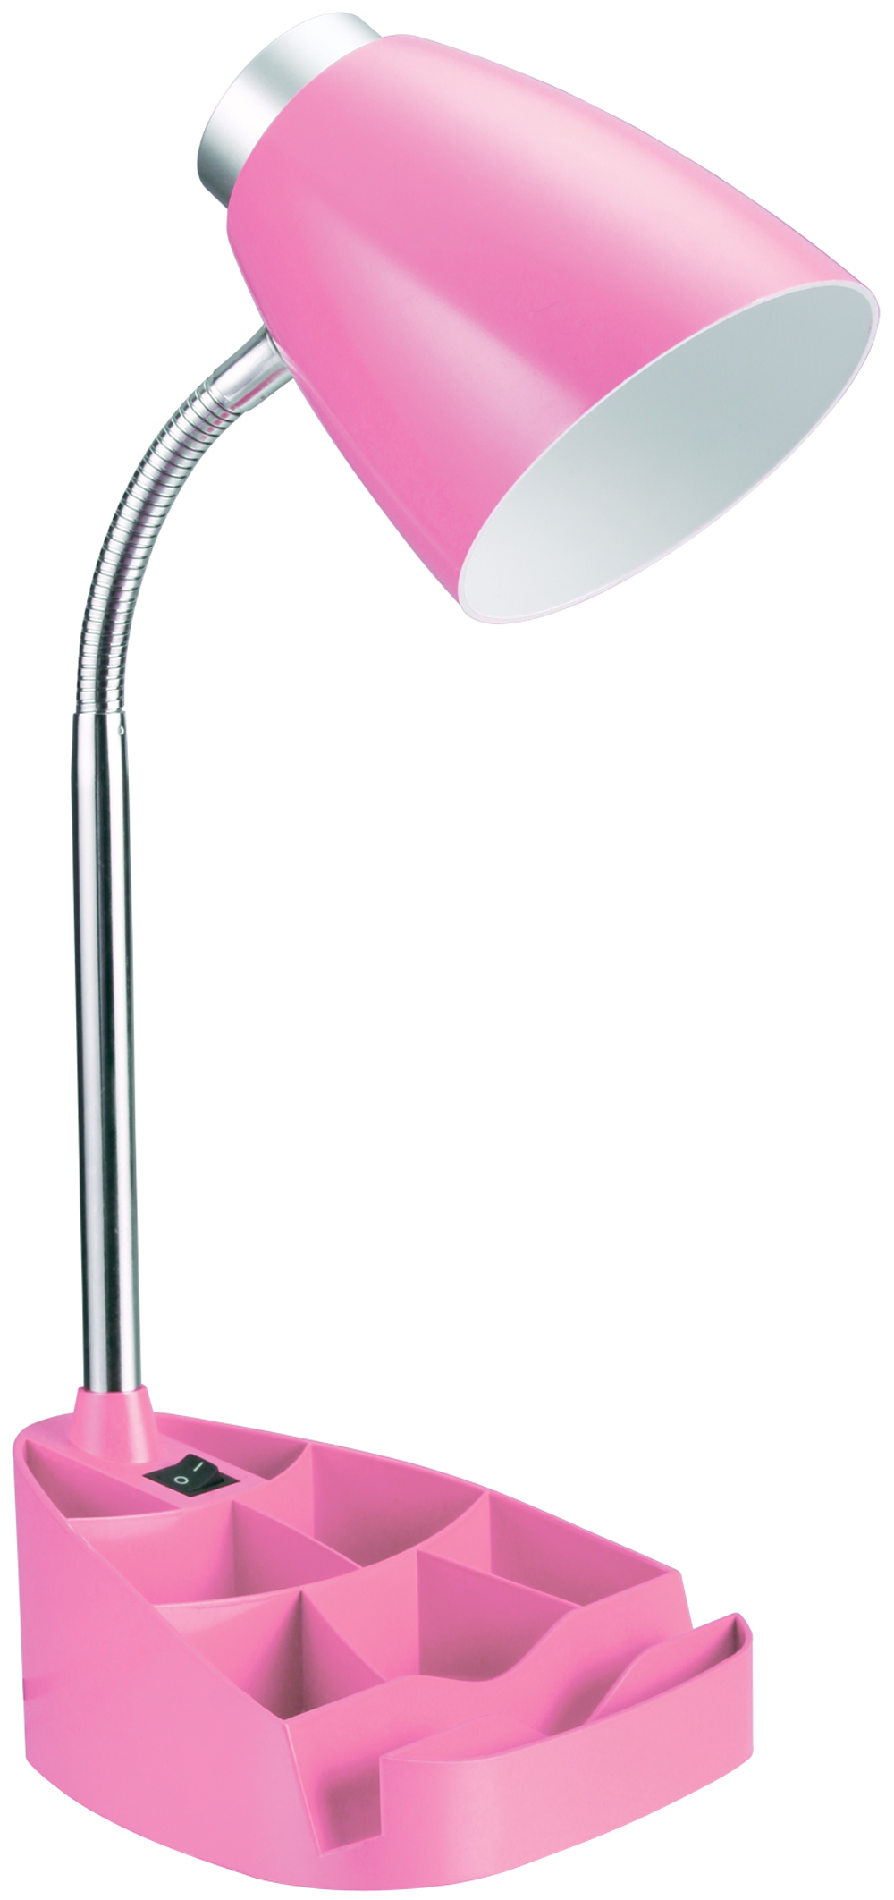 Limelights Pink Gooseneck Organizer Desk Lamp with iPad Stand or Book Holder